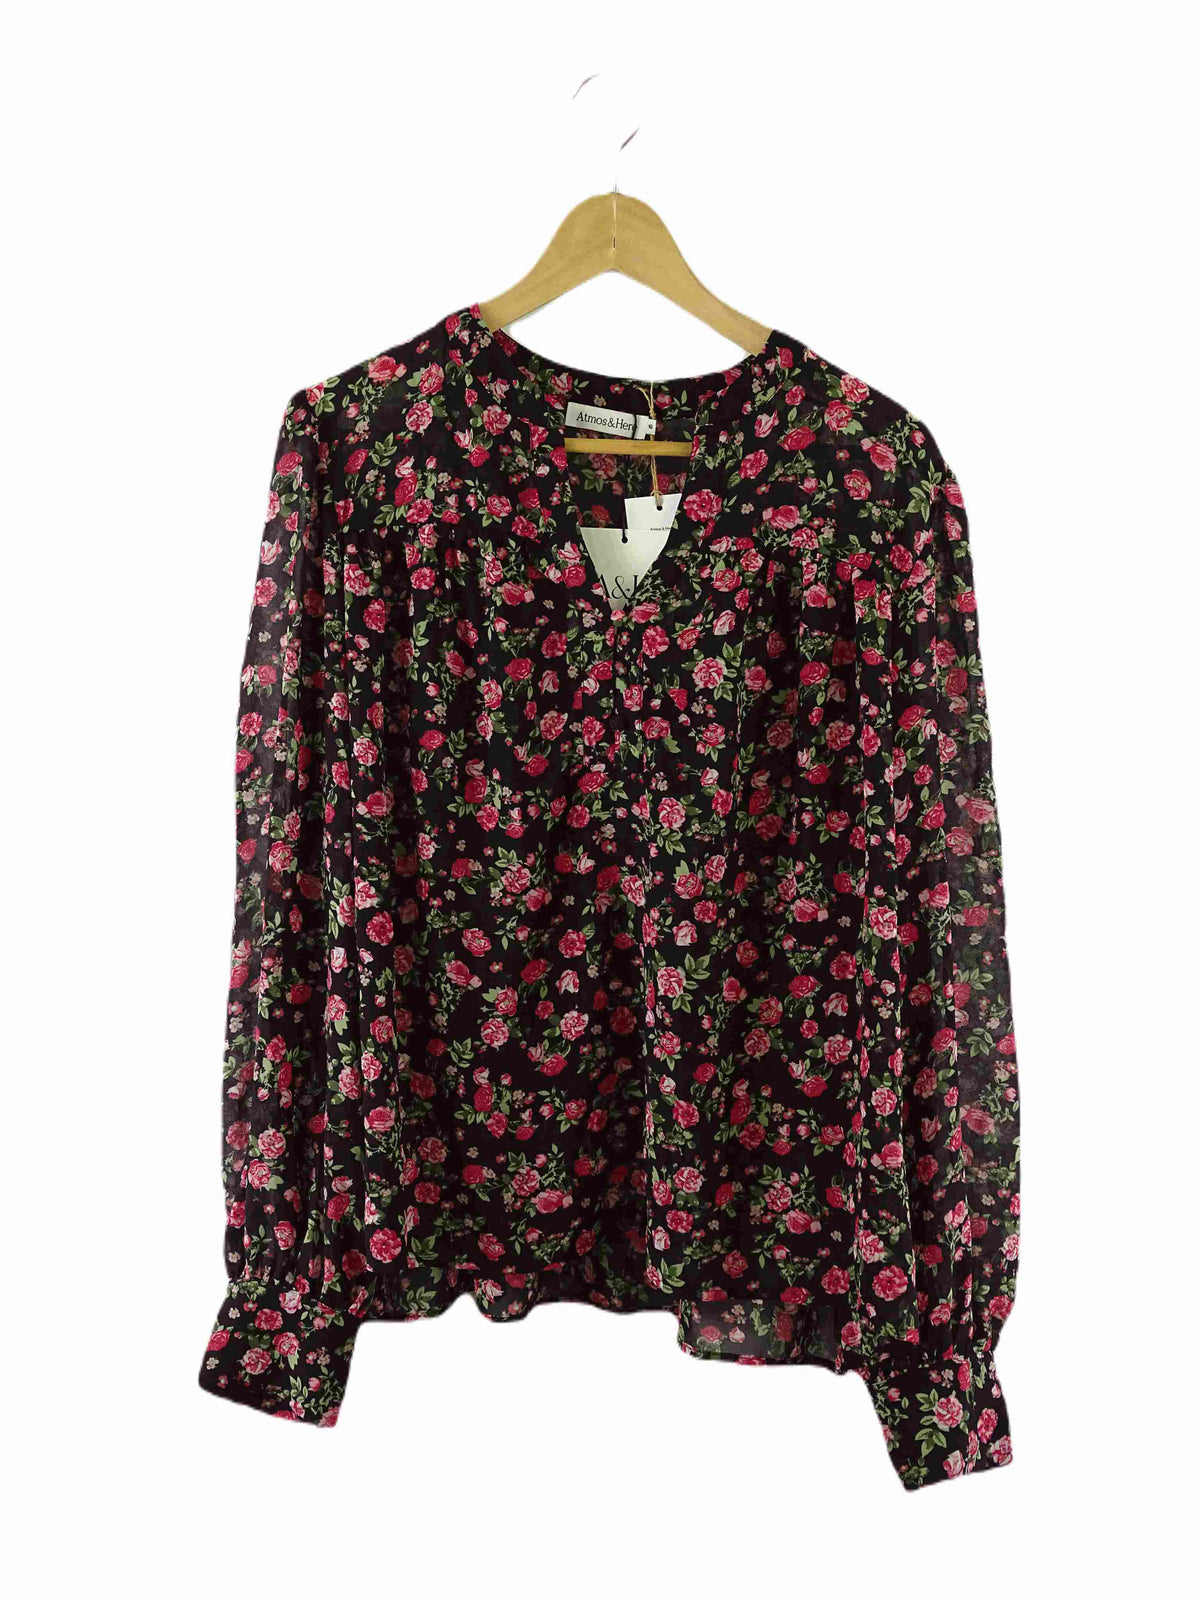 Atmos &amp; Here Black and Pink Floral Blouse 16